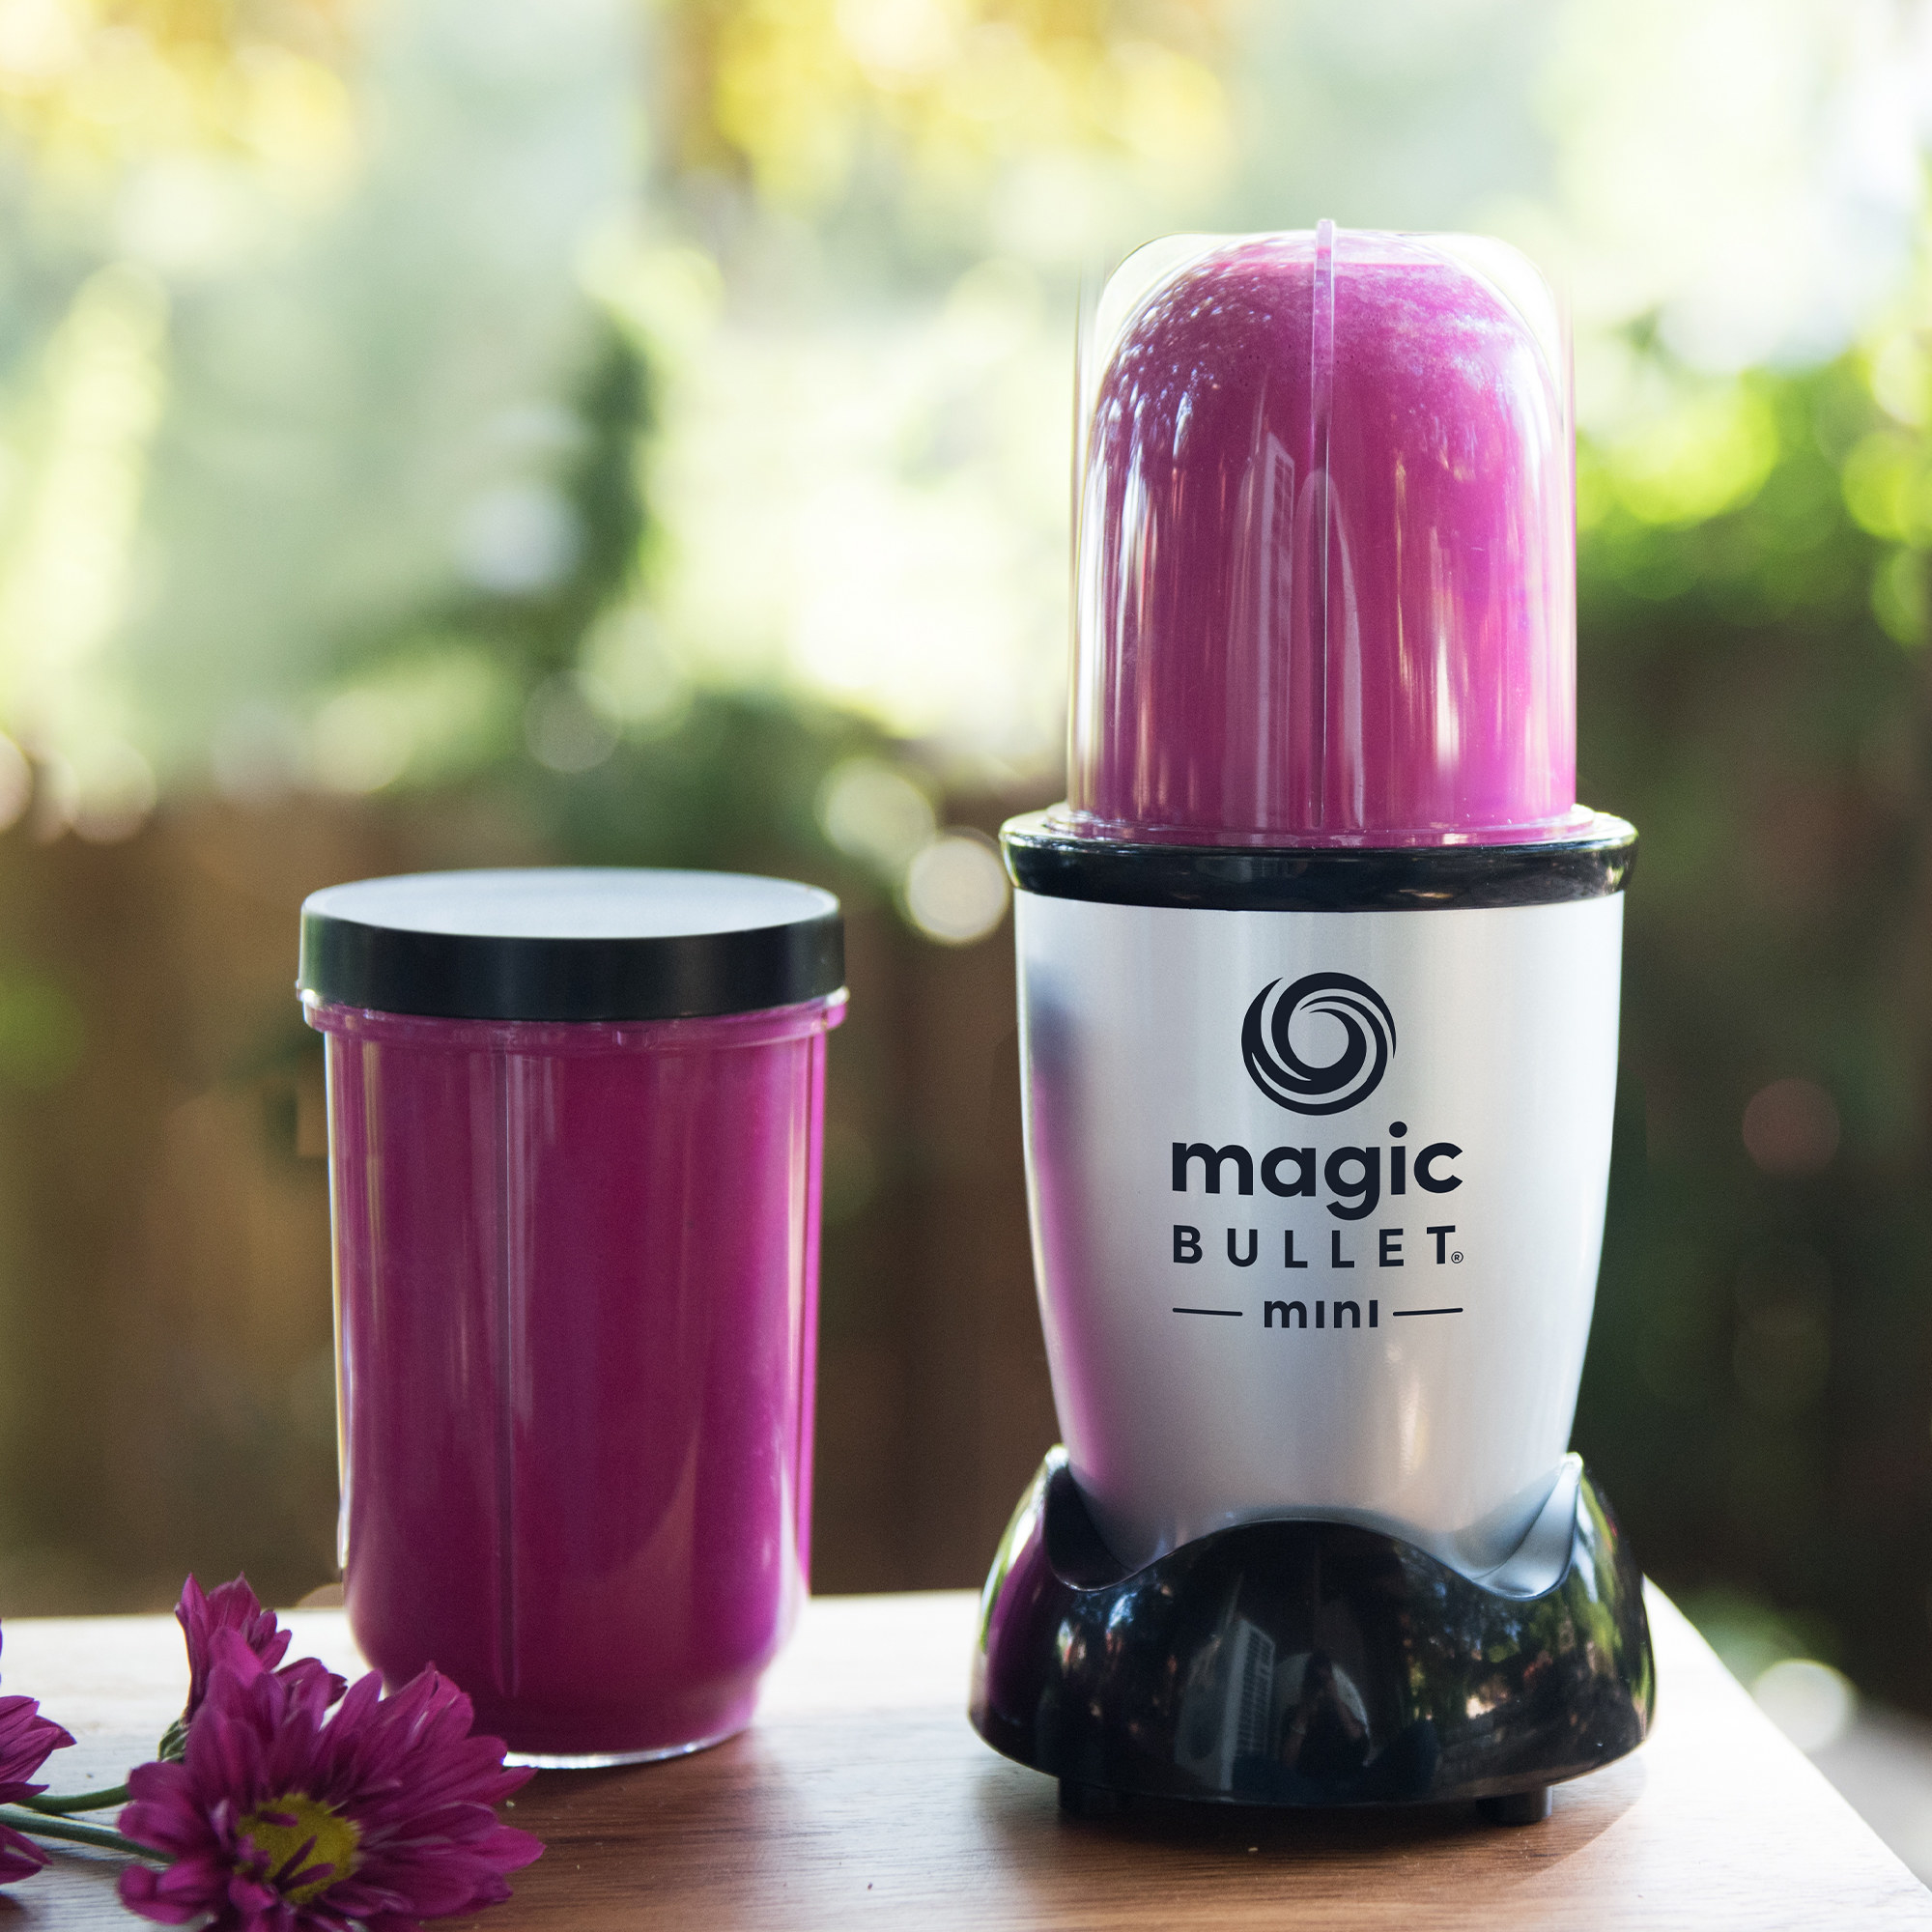 A silver blender with a black base and clear plastic cup filled with a fuchsia-colored smoothie